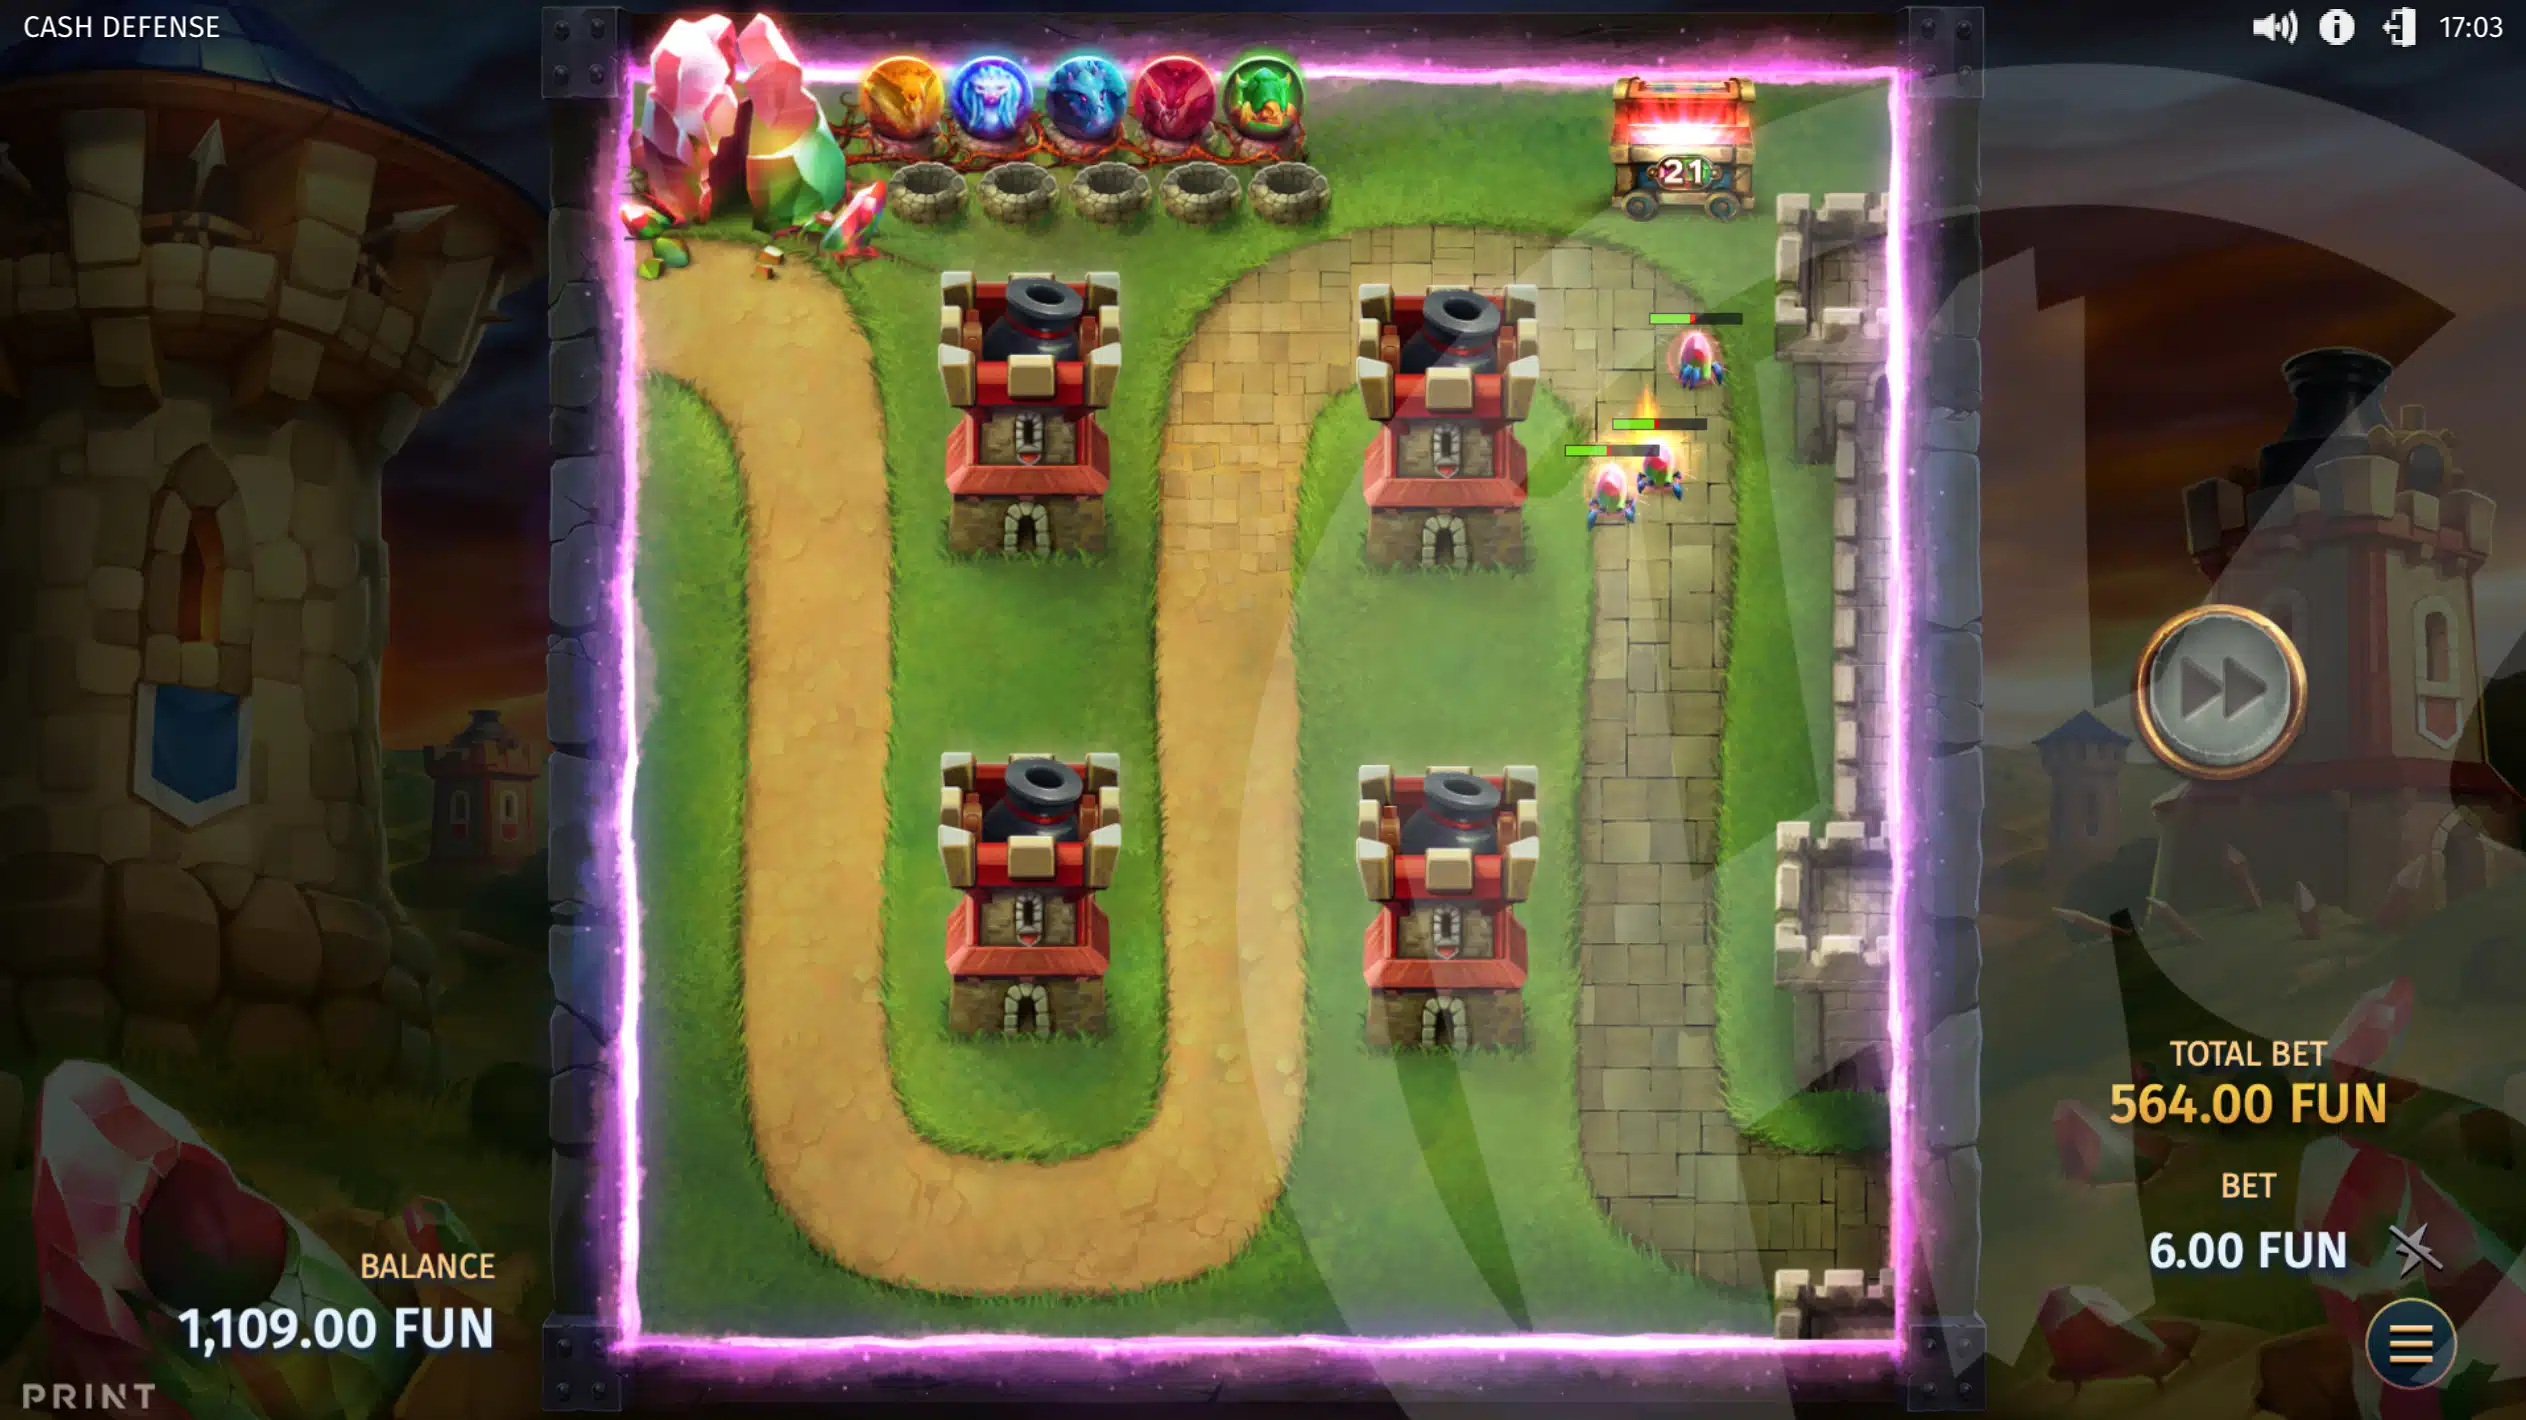 Eliminate at Least 5 Symbol Enemies to Trigger the Second Wave in the Tower Defense Game